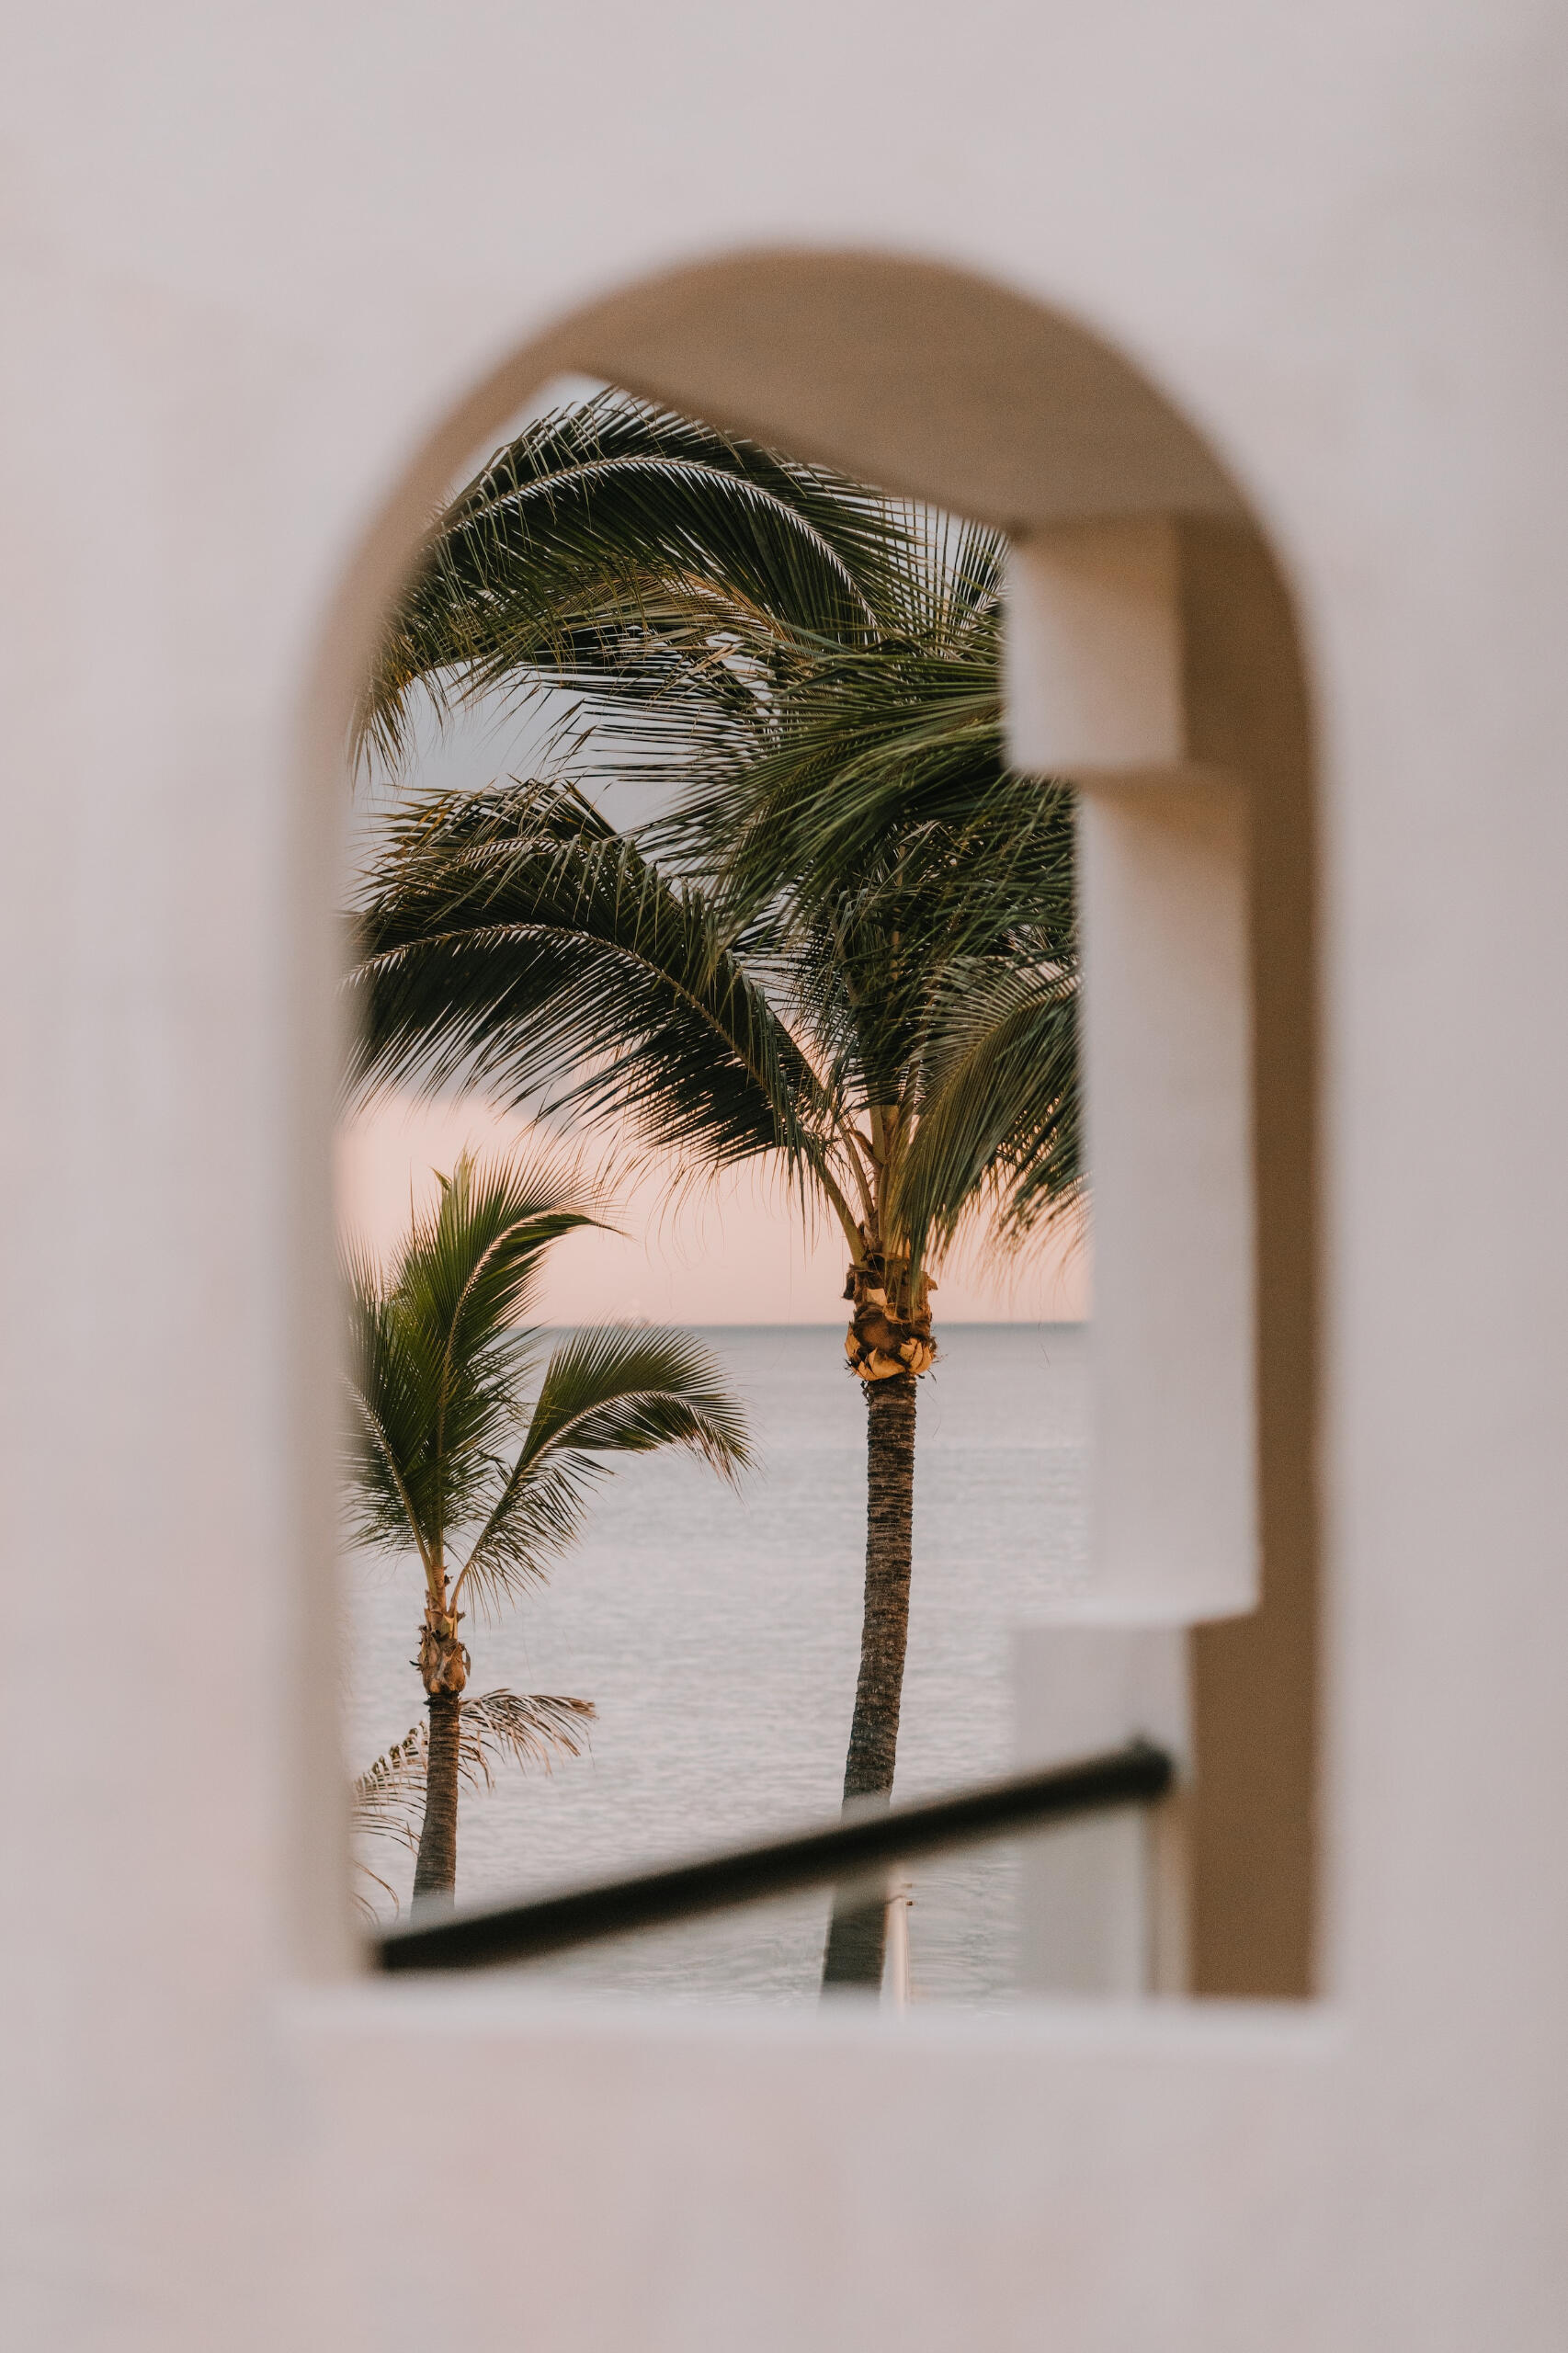 A pair of palm trees sway in the breeze, seen through a window overlooking the ocean at sunset.